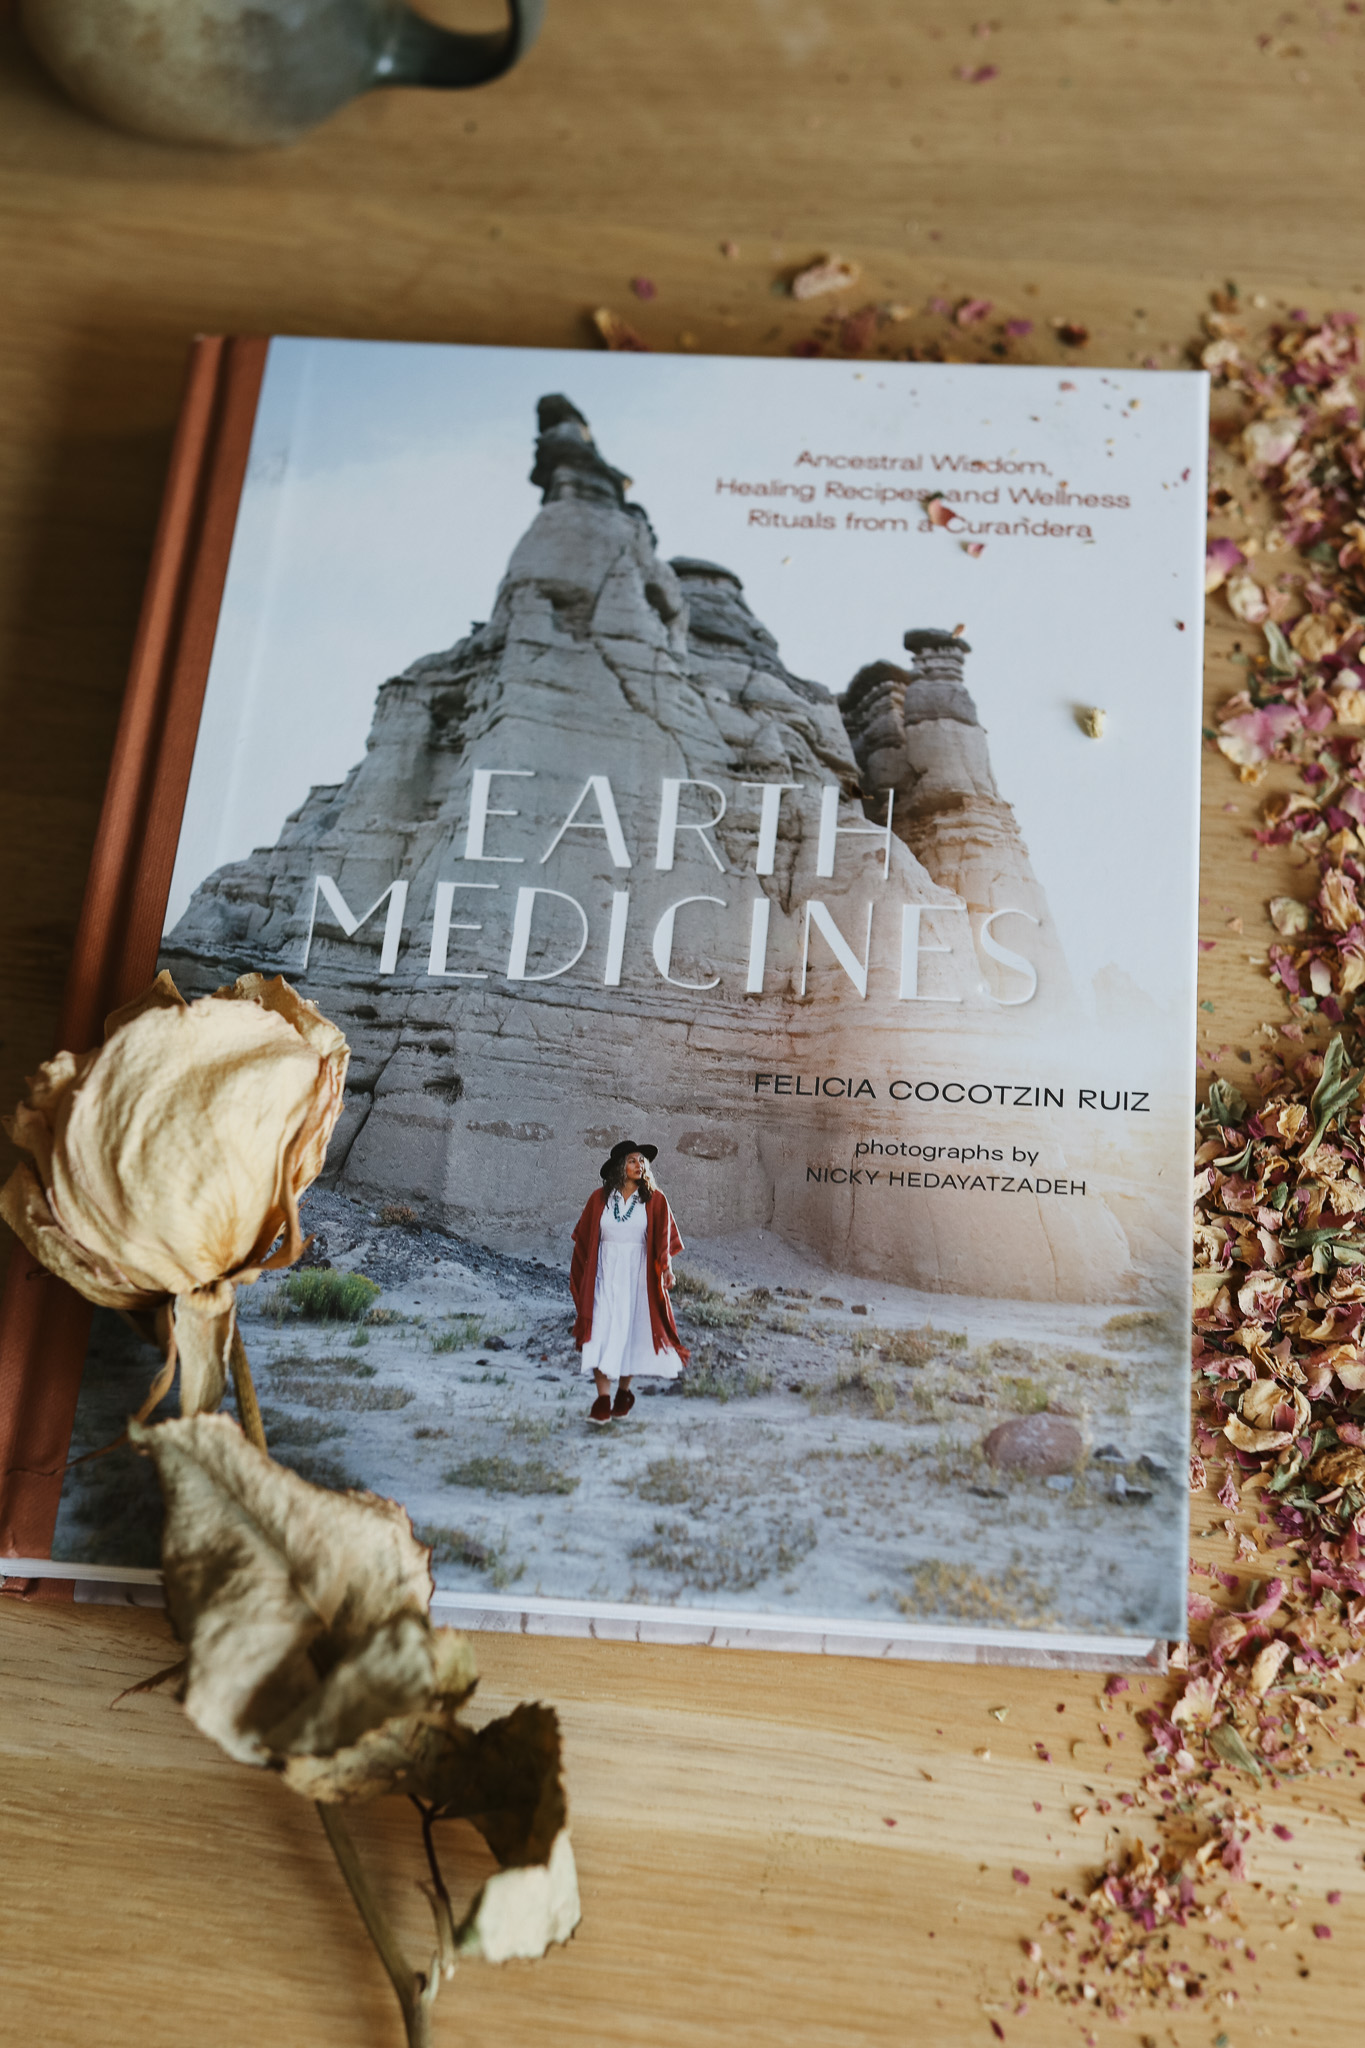 Earth Medicines book on a table